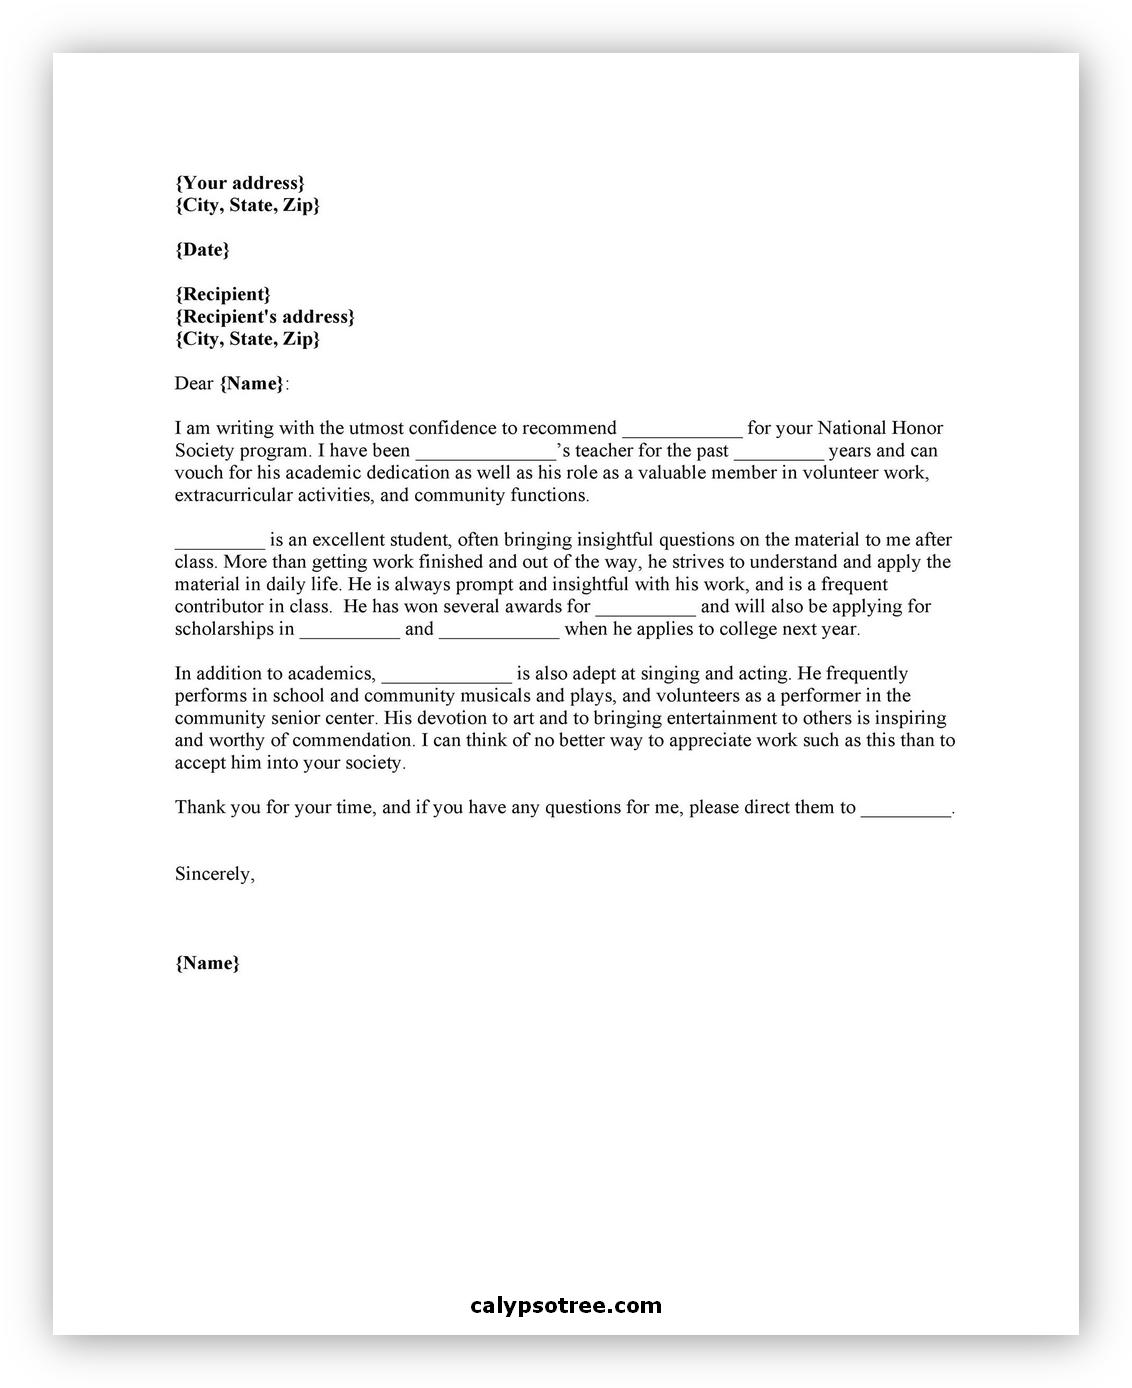 Letter of Recommendation Format 04